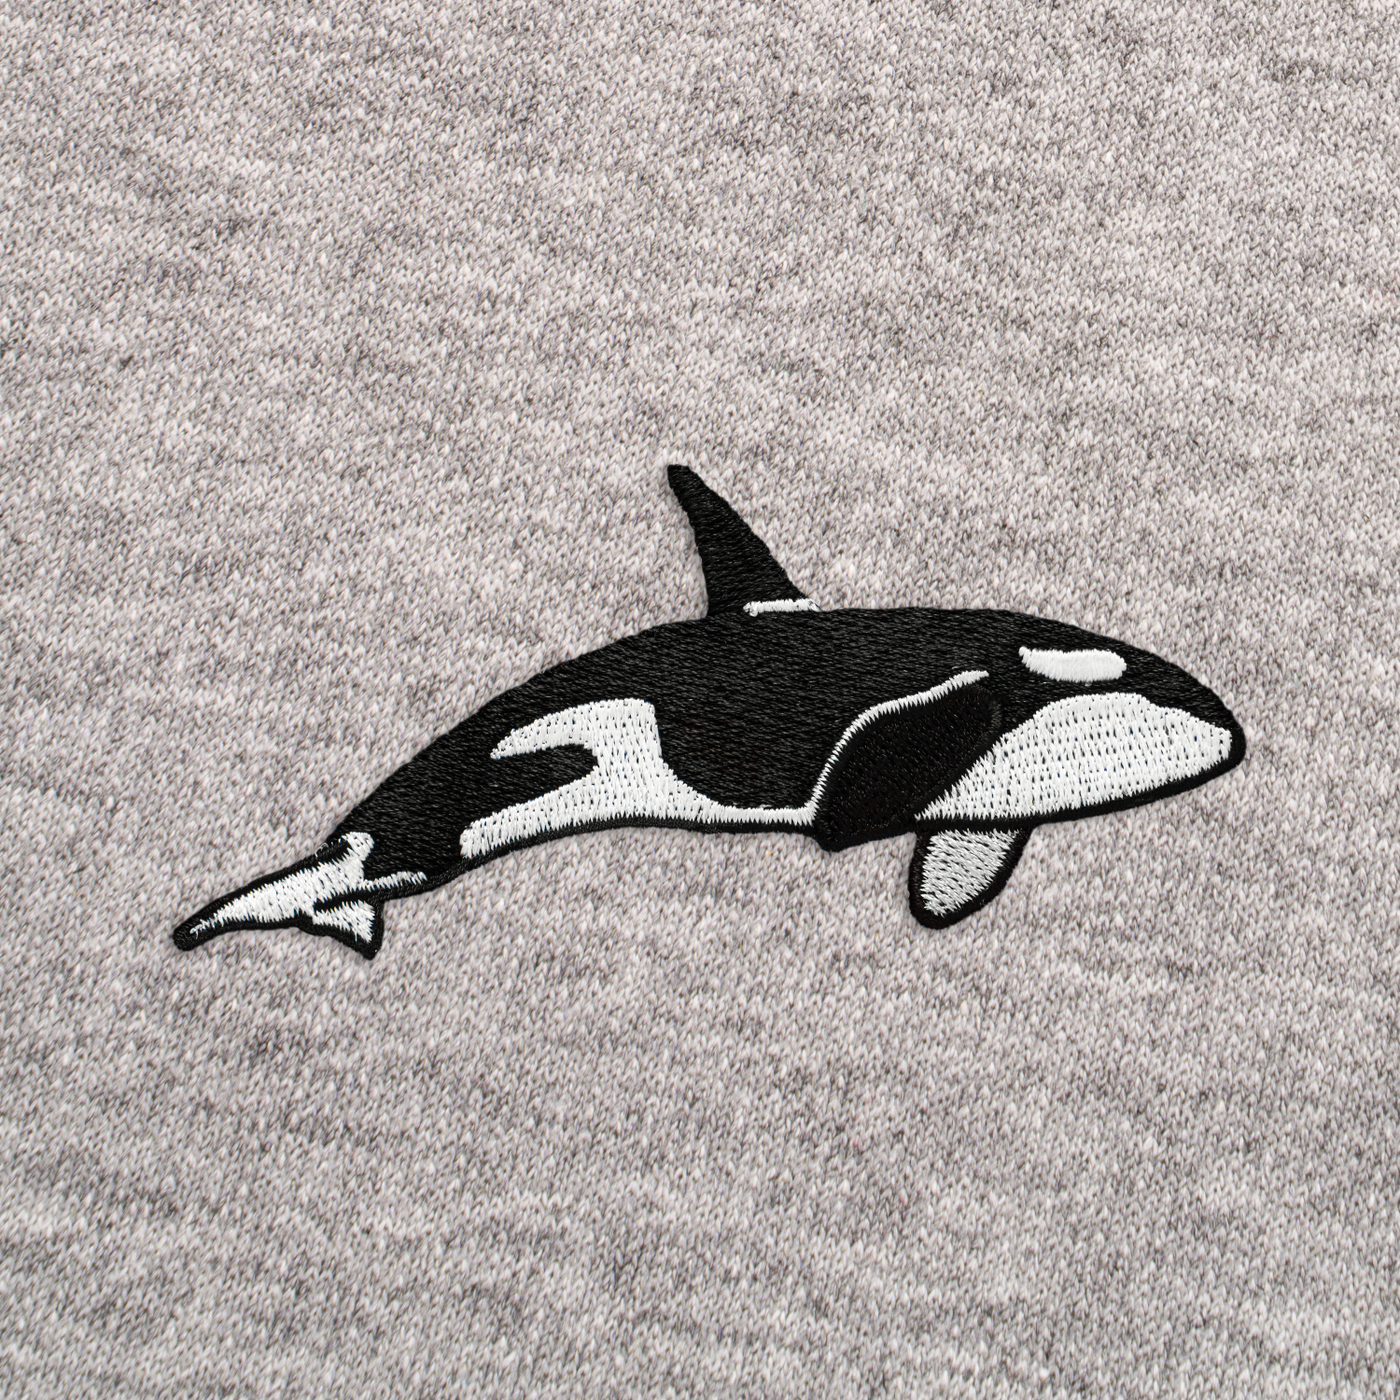 Bobby's Planet Men's Embroidered Orca Sweatshirt from Seven Seas Fish Animals Collection in Sport Grey Color#color_sport-grey